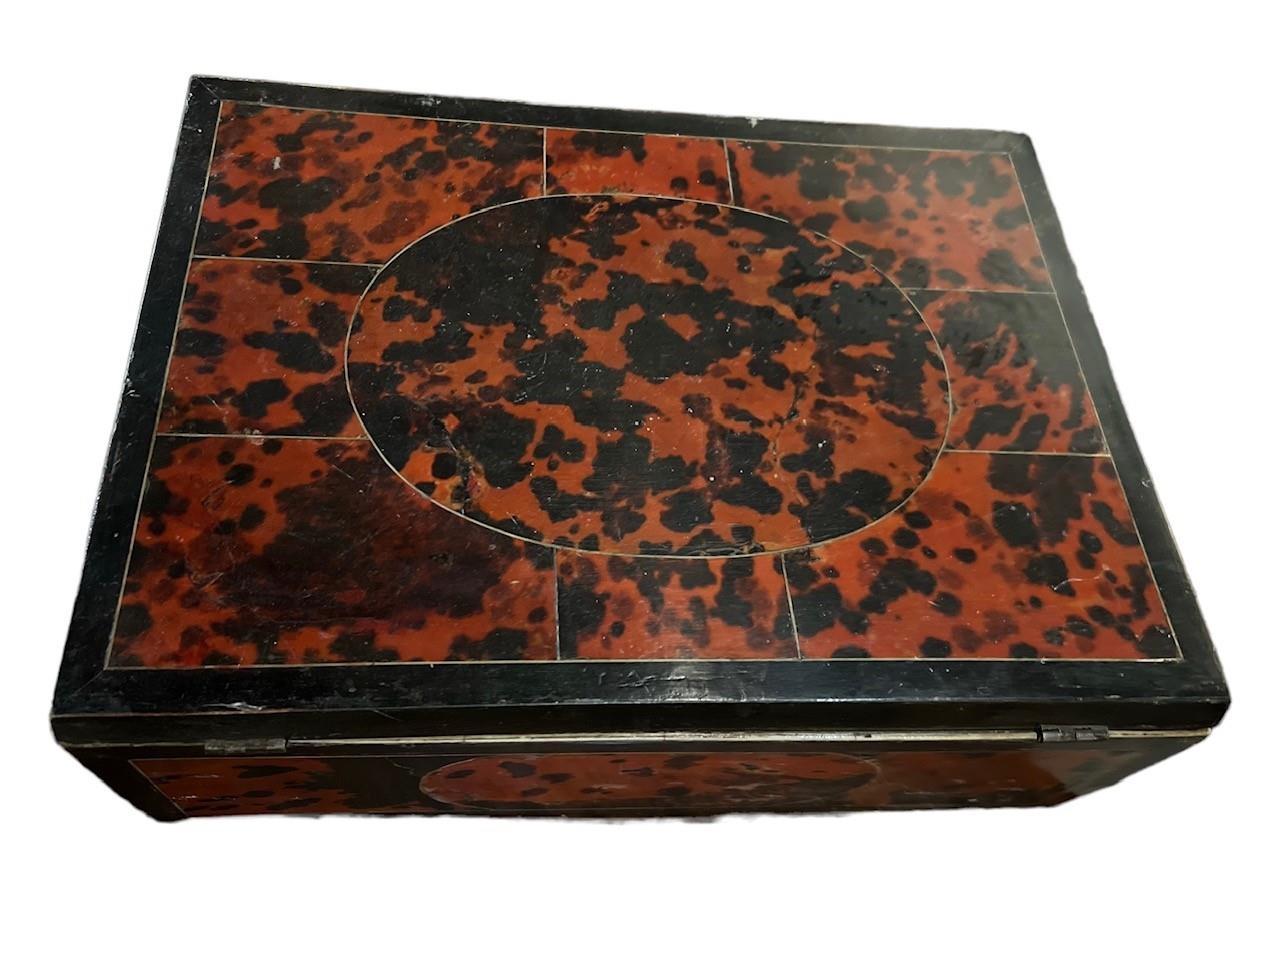 AN 18TH CENTURY TORTOISESHELL WORK BOX With hinged lid opening to reveal starburst inlaid interior - Image 2 of 4